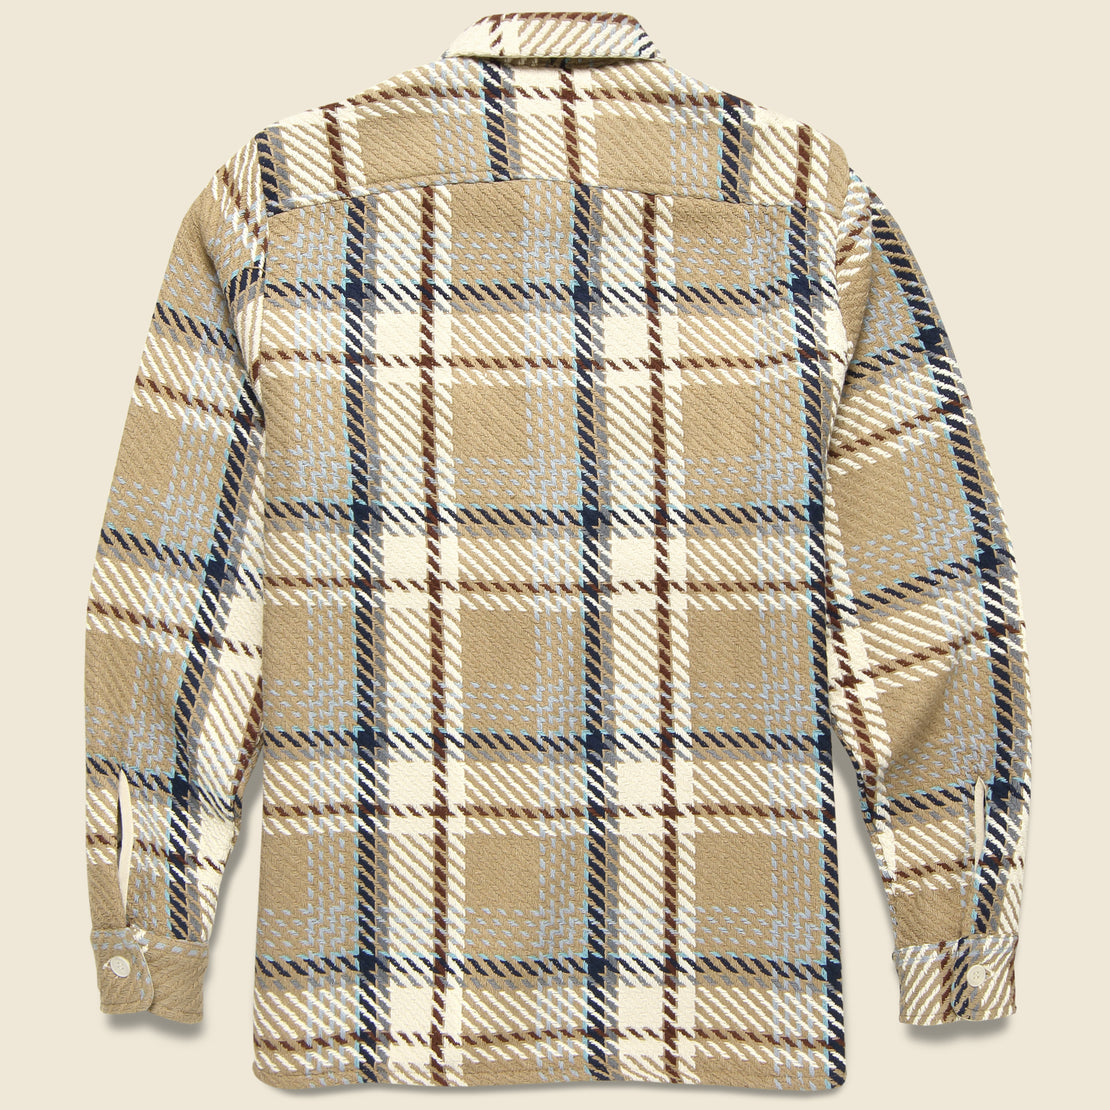 Whiting Overshirt - Natural Beatnik Check - Wax London - STAG Provisions - Tops - L/S Woven - Plaid